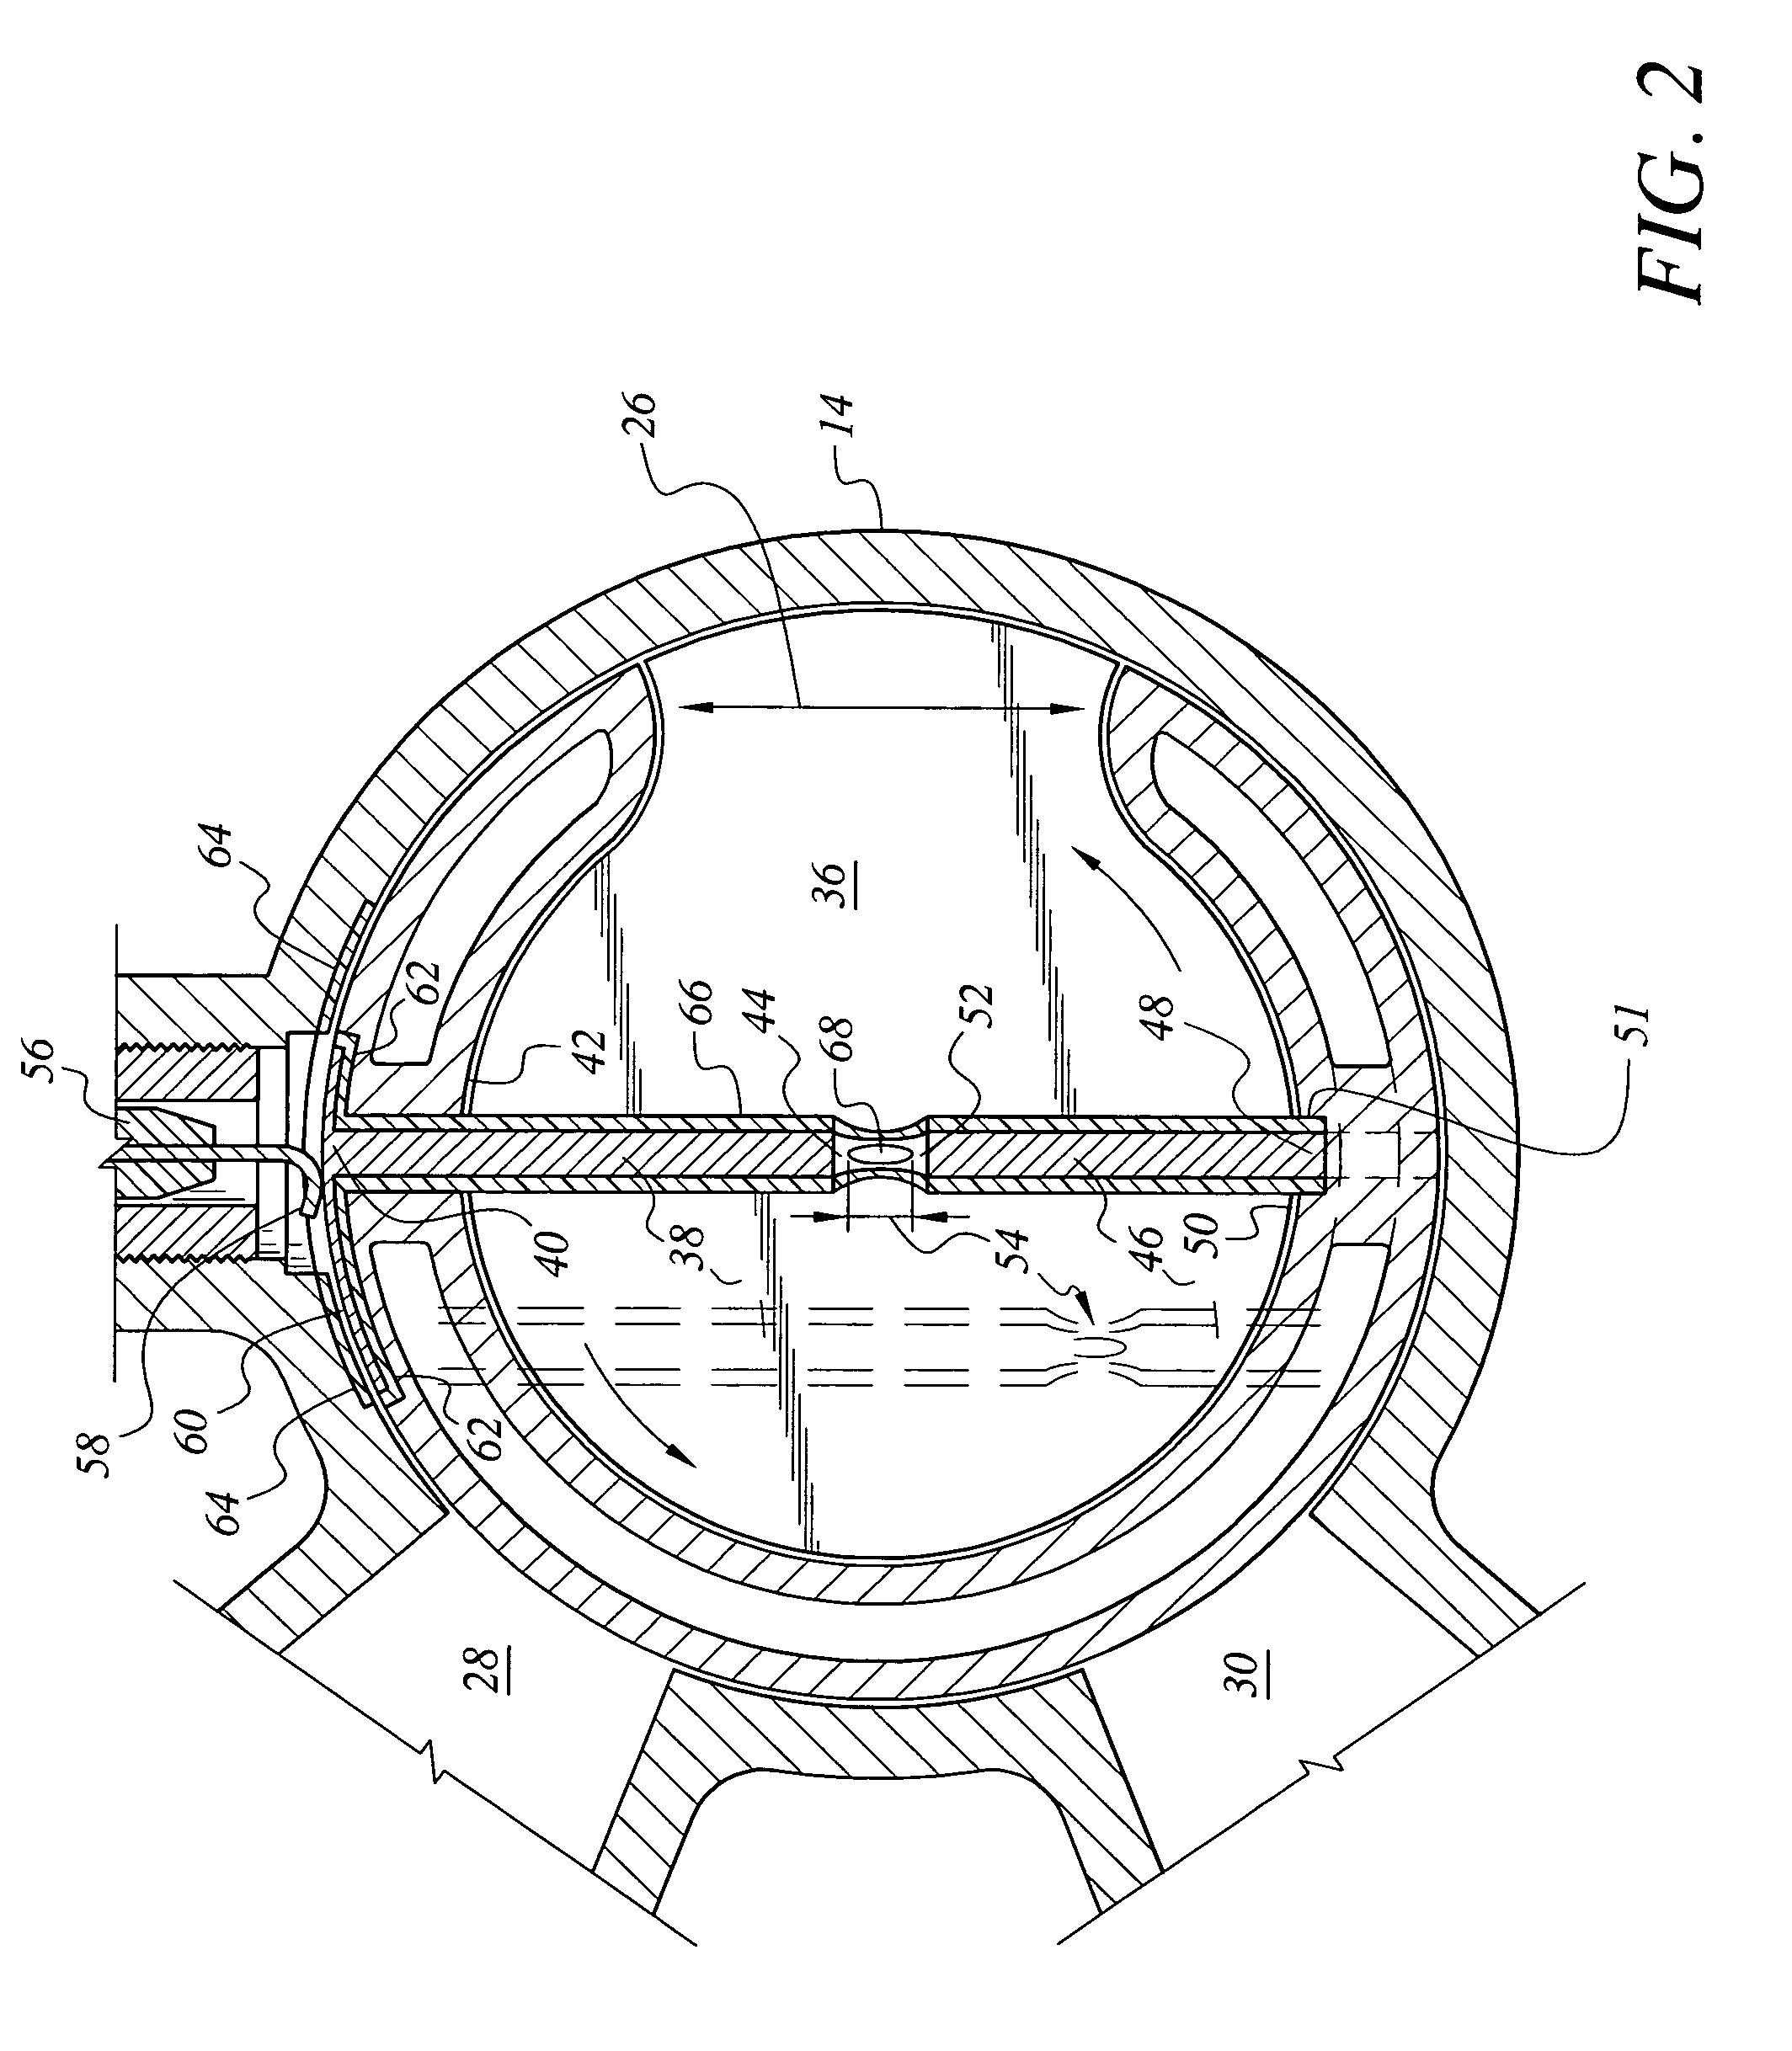 Centrally located ignition source in a combustion chamber